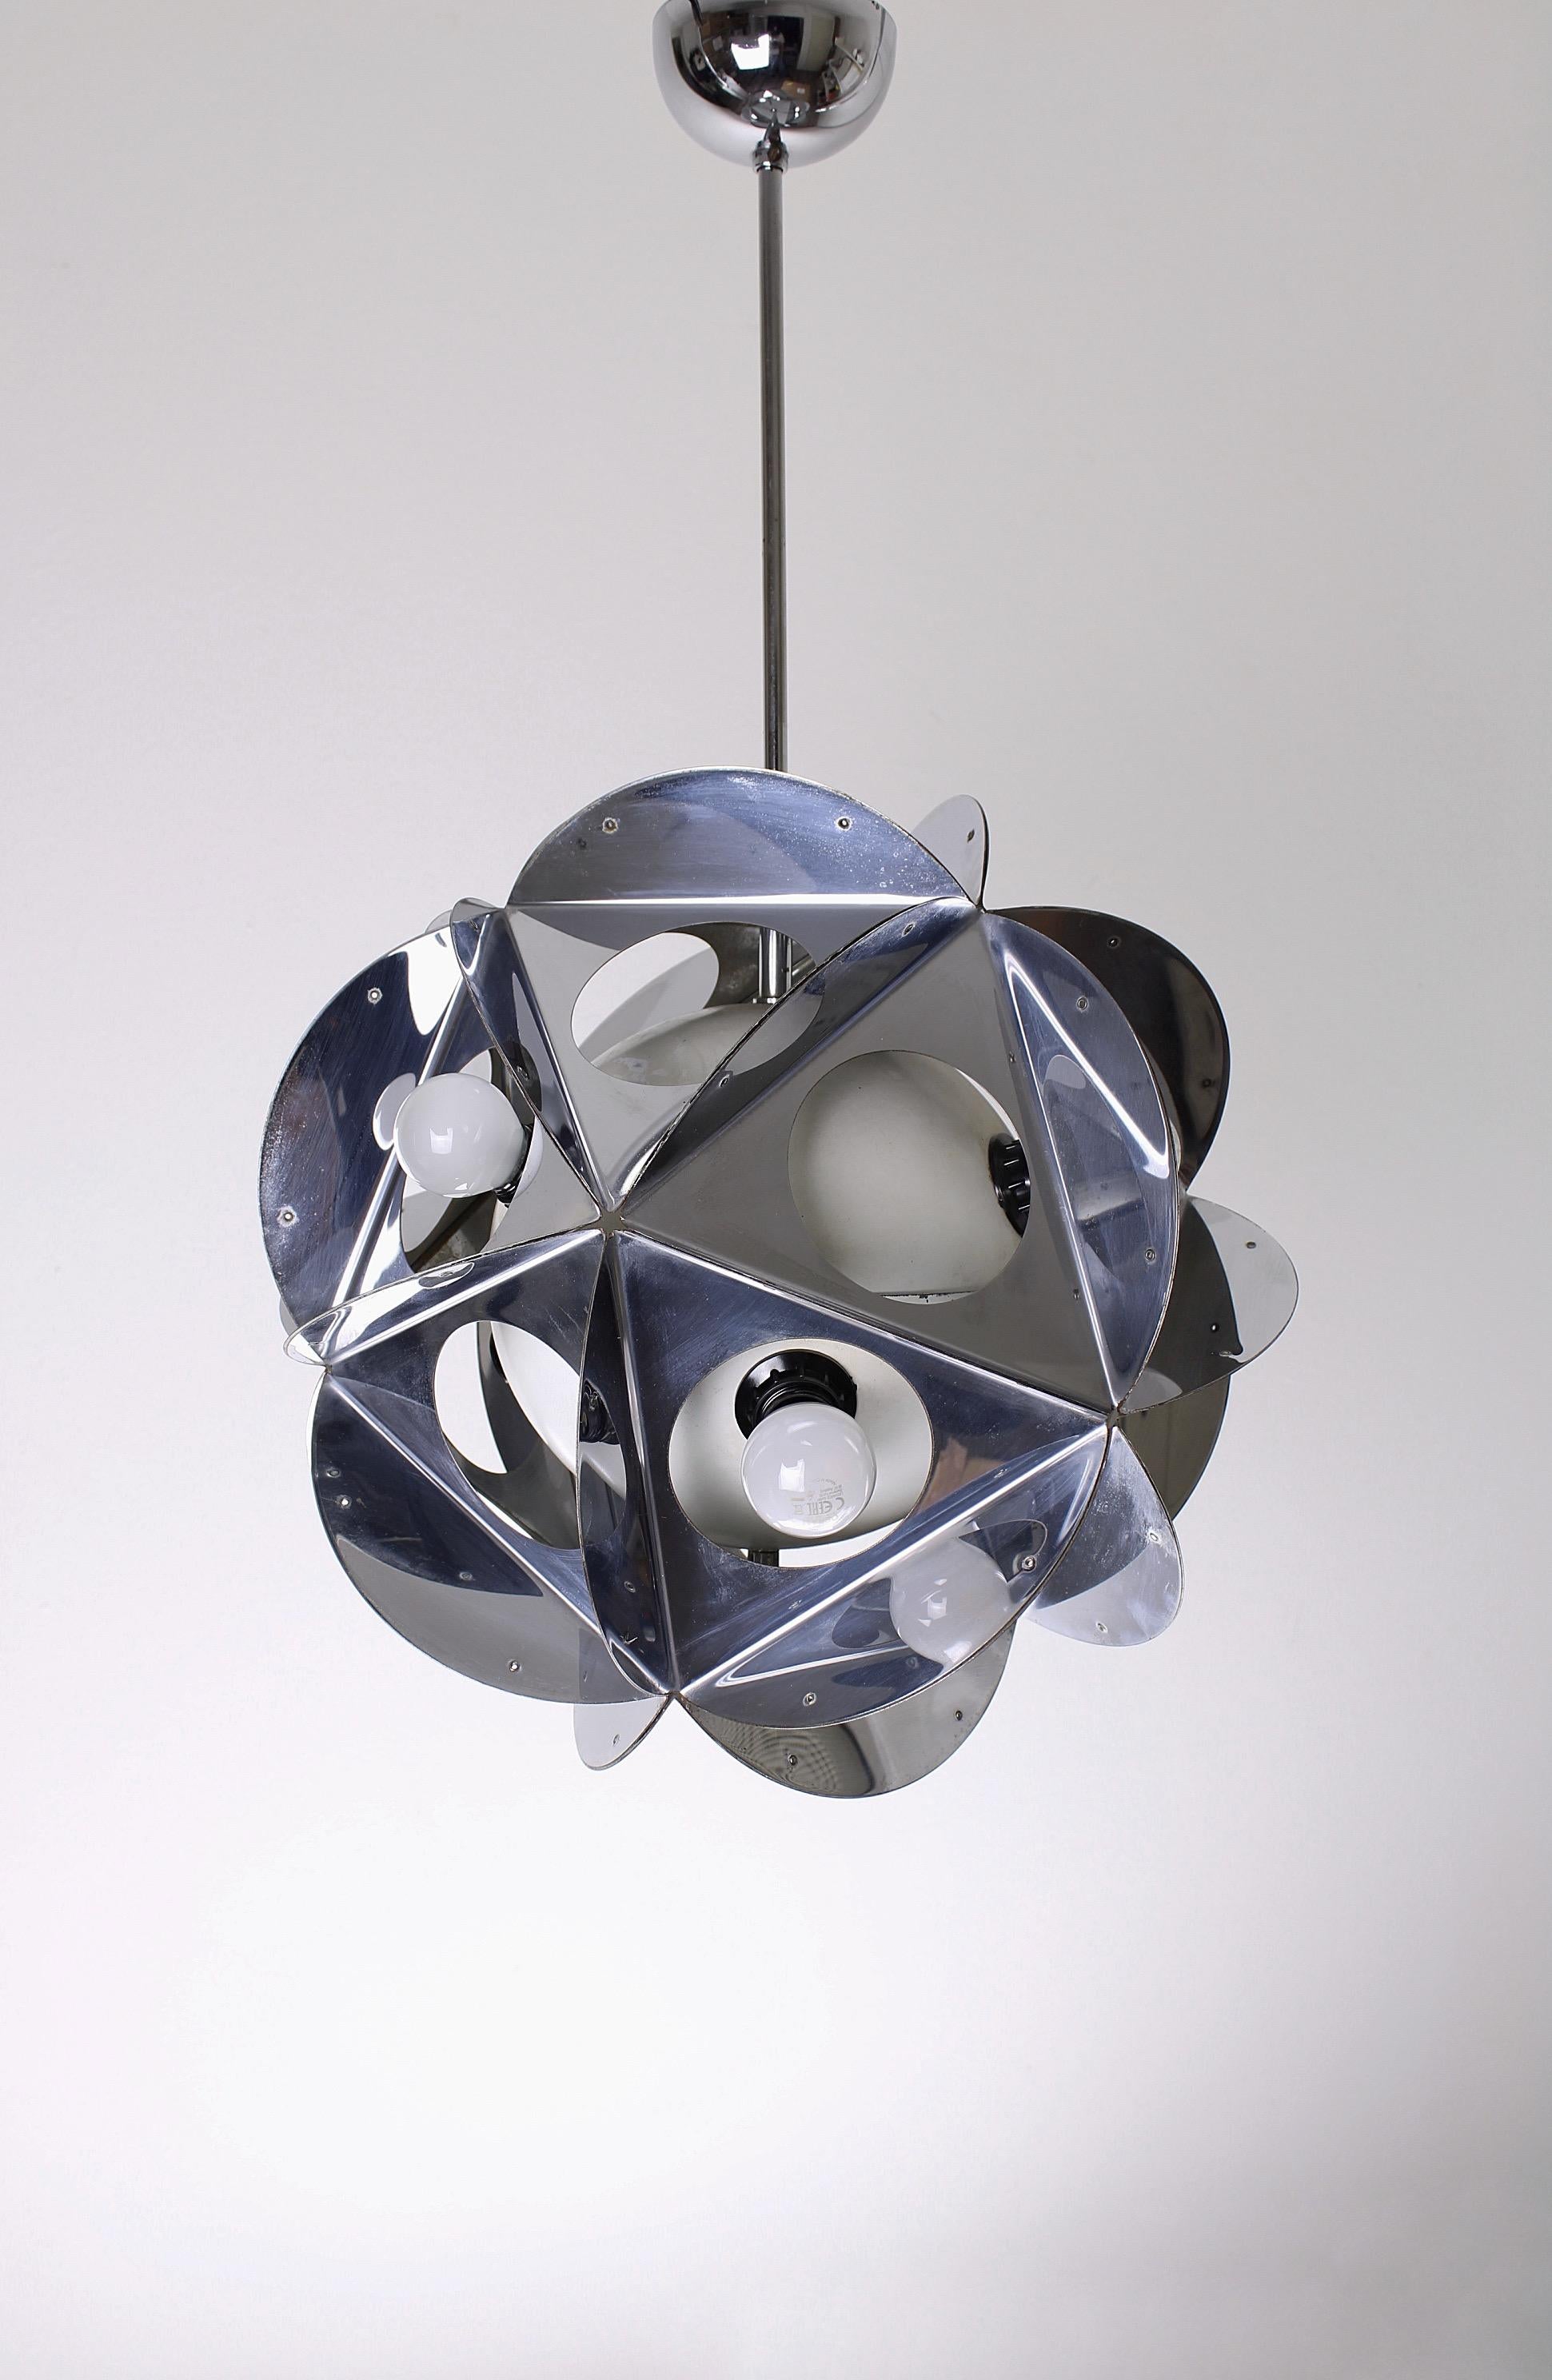 Sculptural ceiling lamp with the Acona Biconbi structure. Designed by Bruno Munari at the end of the 1950s. It was originally born as a sculpture and is the result of Munari’s explorations on the theme of multiplicity. First presented as a game in